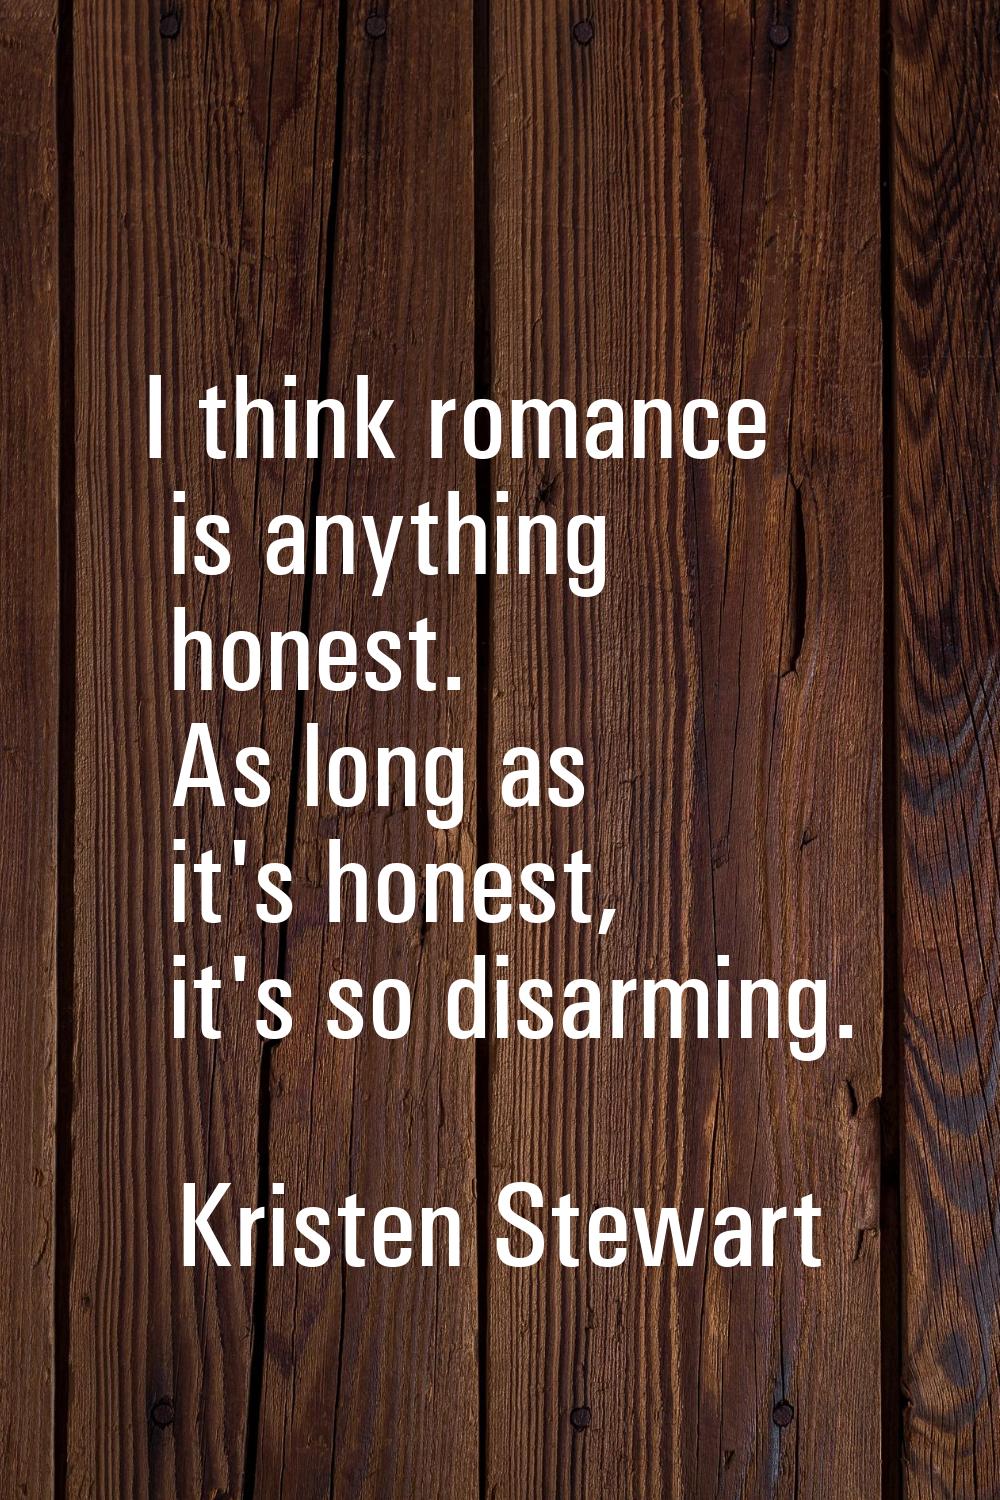 I think romance is anything honest. As long as it's honest, it's so disarming.